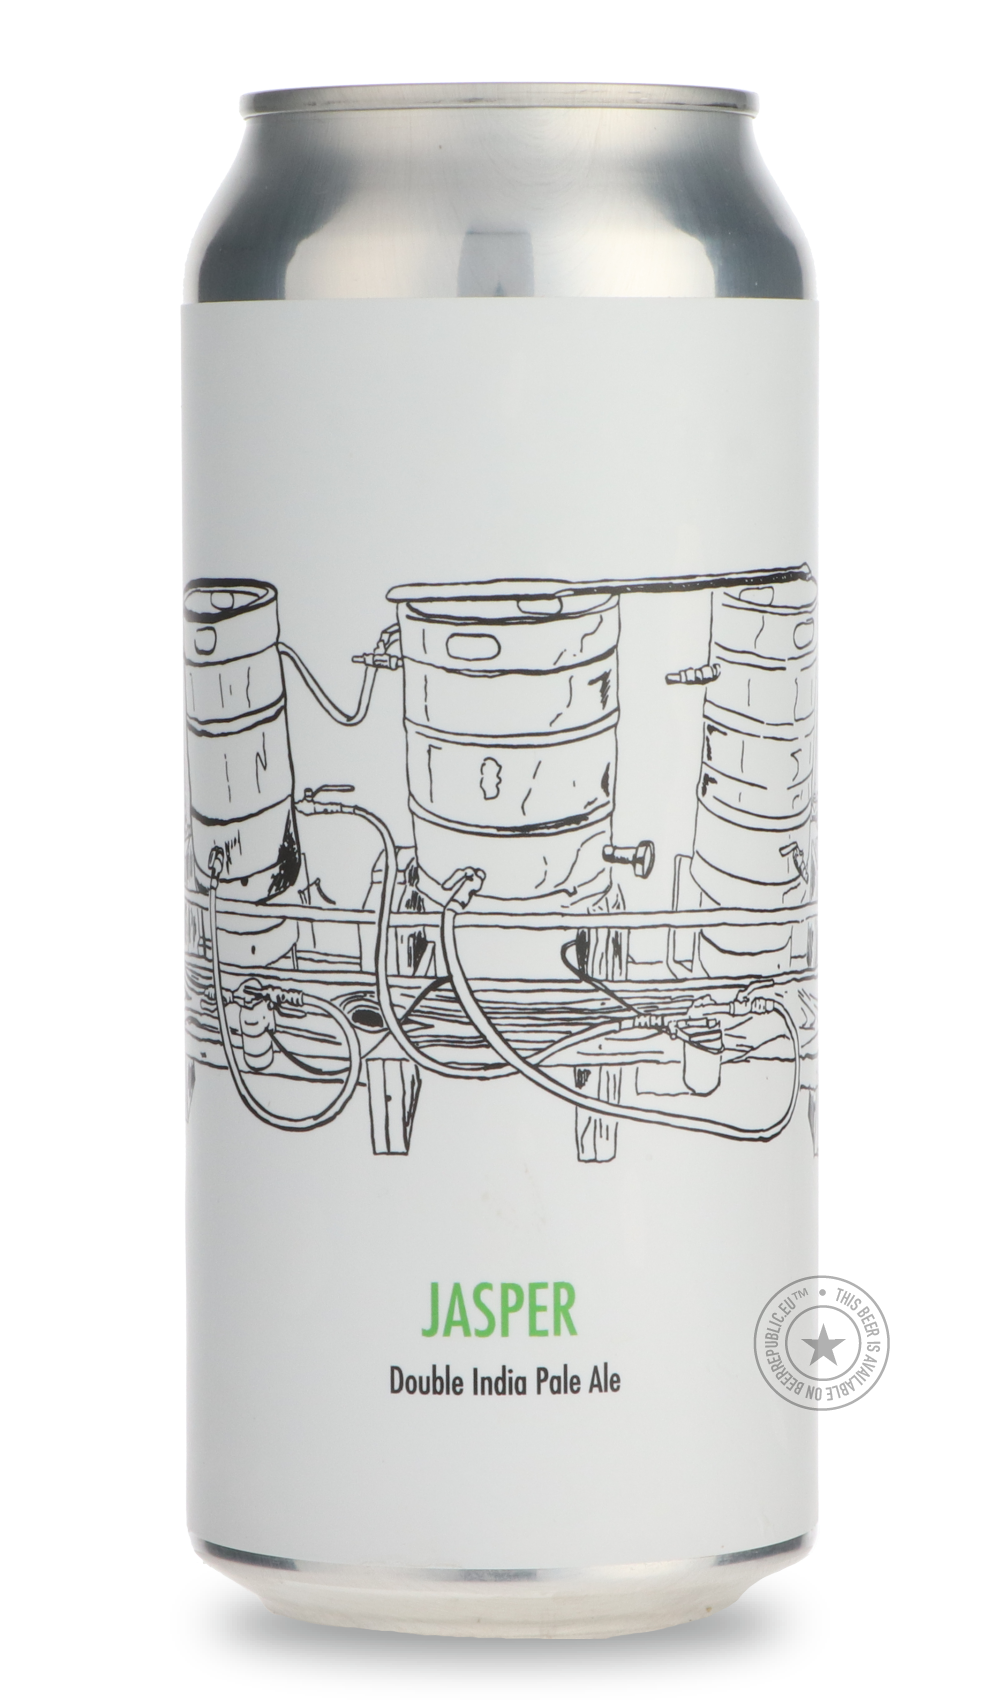 -Fidens- Jasper-IPA- Only @ Beer Republic - The best online beer store for American & Canadian craft beer - Buy beer online from the USA and Canada - Bier online kopen - Amerikaans bier kopen - Craft beer store - Craft beer kopen - Amerikanisch bier kaufen - Bier online kaufen - Acheter biere online - IPA - Stout - Porter - New England IPA - Hazy IPA - Imperial Stout - Barrel Aged - Barrel Aged Imperial Stout - Brown - Dark beer - Blond - Blonde - Pilsner - Lager - Wheat - Weizen - Amber - Barley Wine - Qua